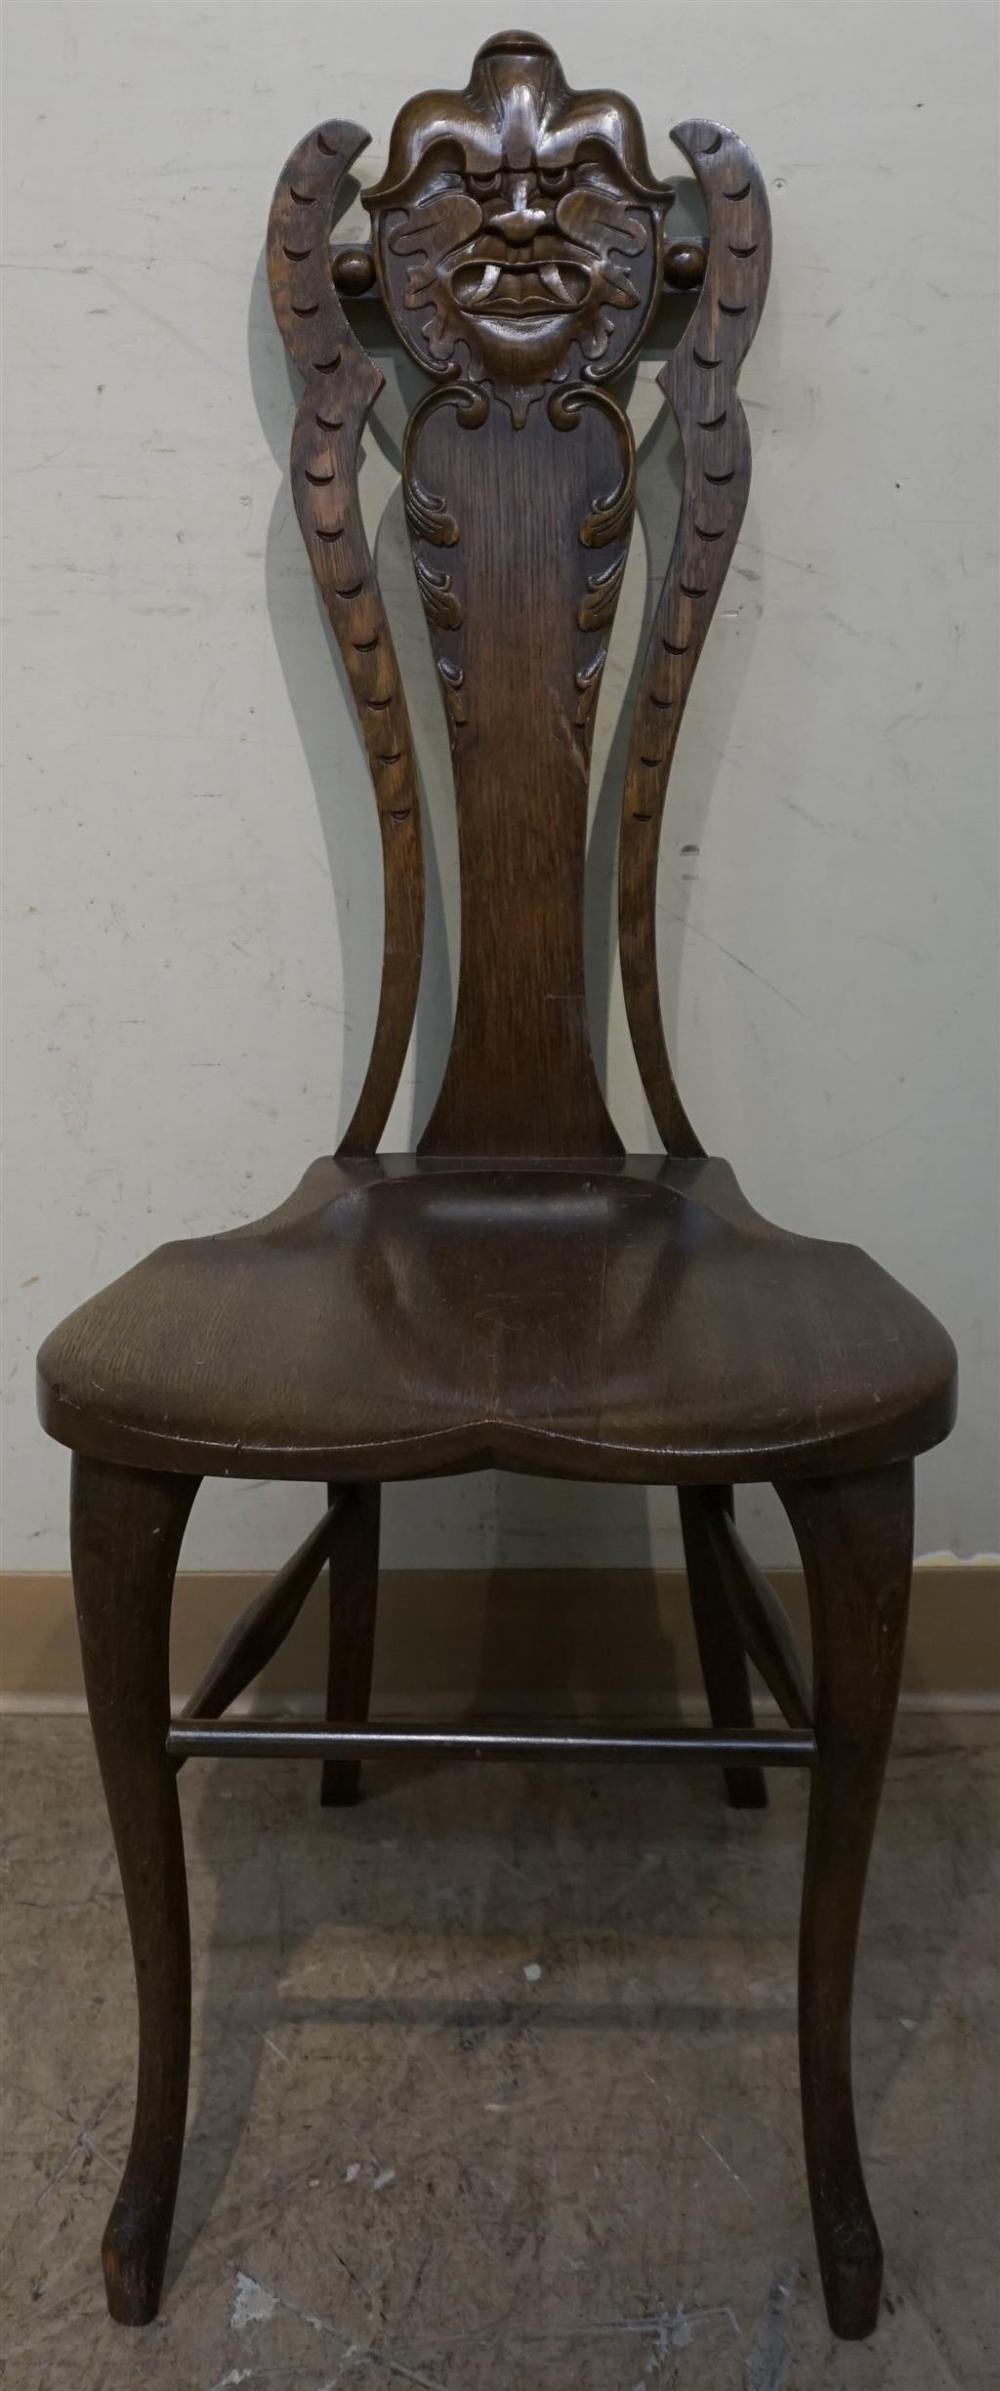 MICHIGAN CHAIR COMPANY CARVED FACE 32957b